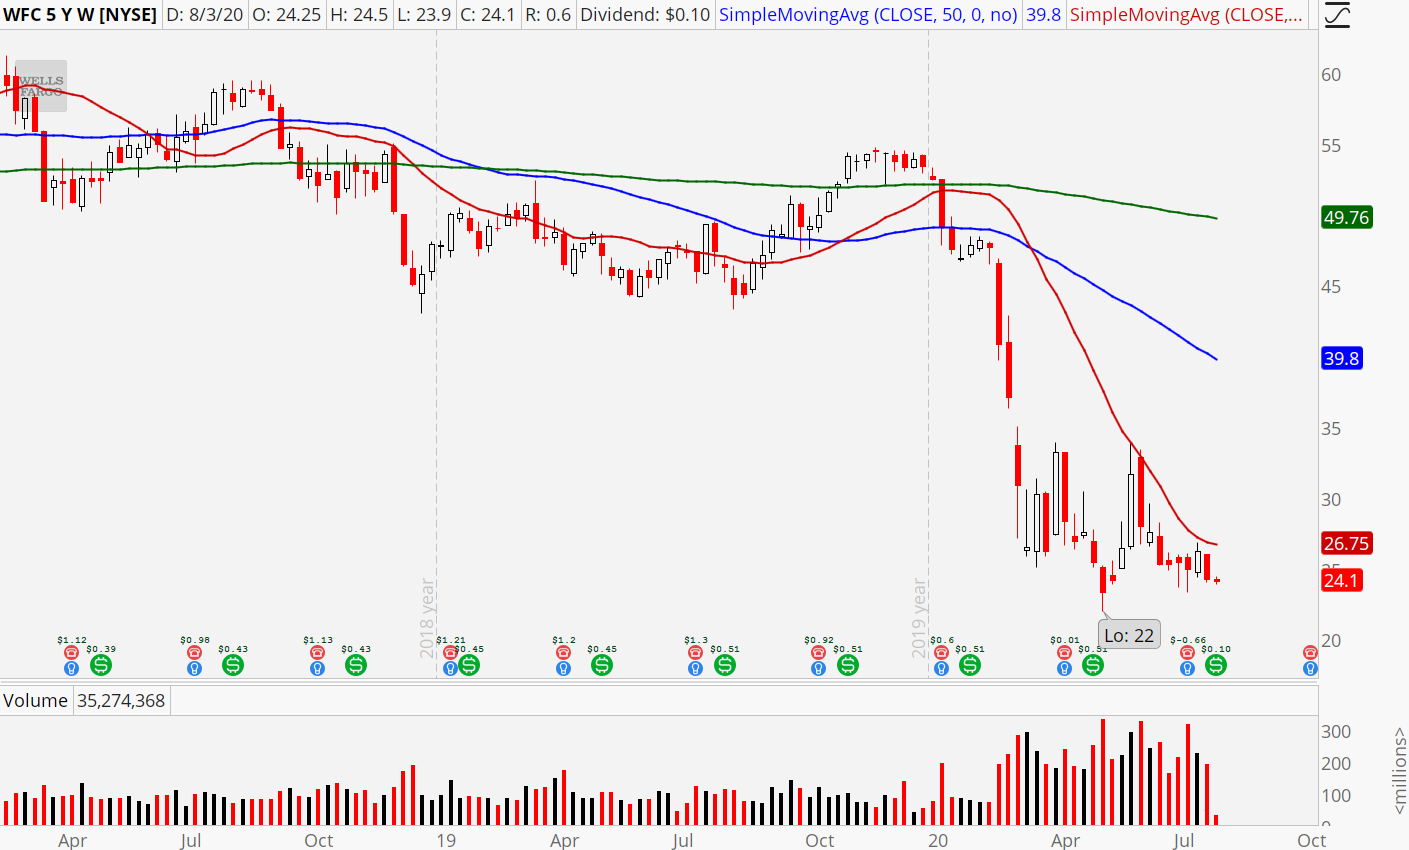 Wells Fargo (WFC) weekly chart showing downtrend